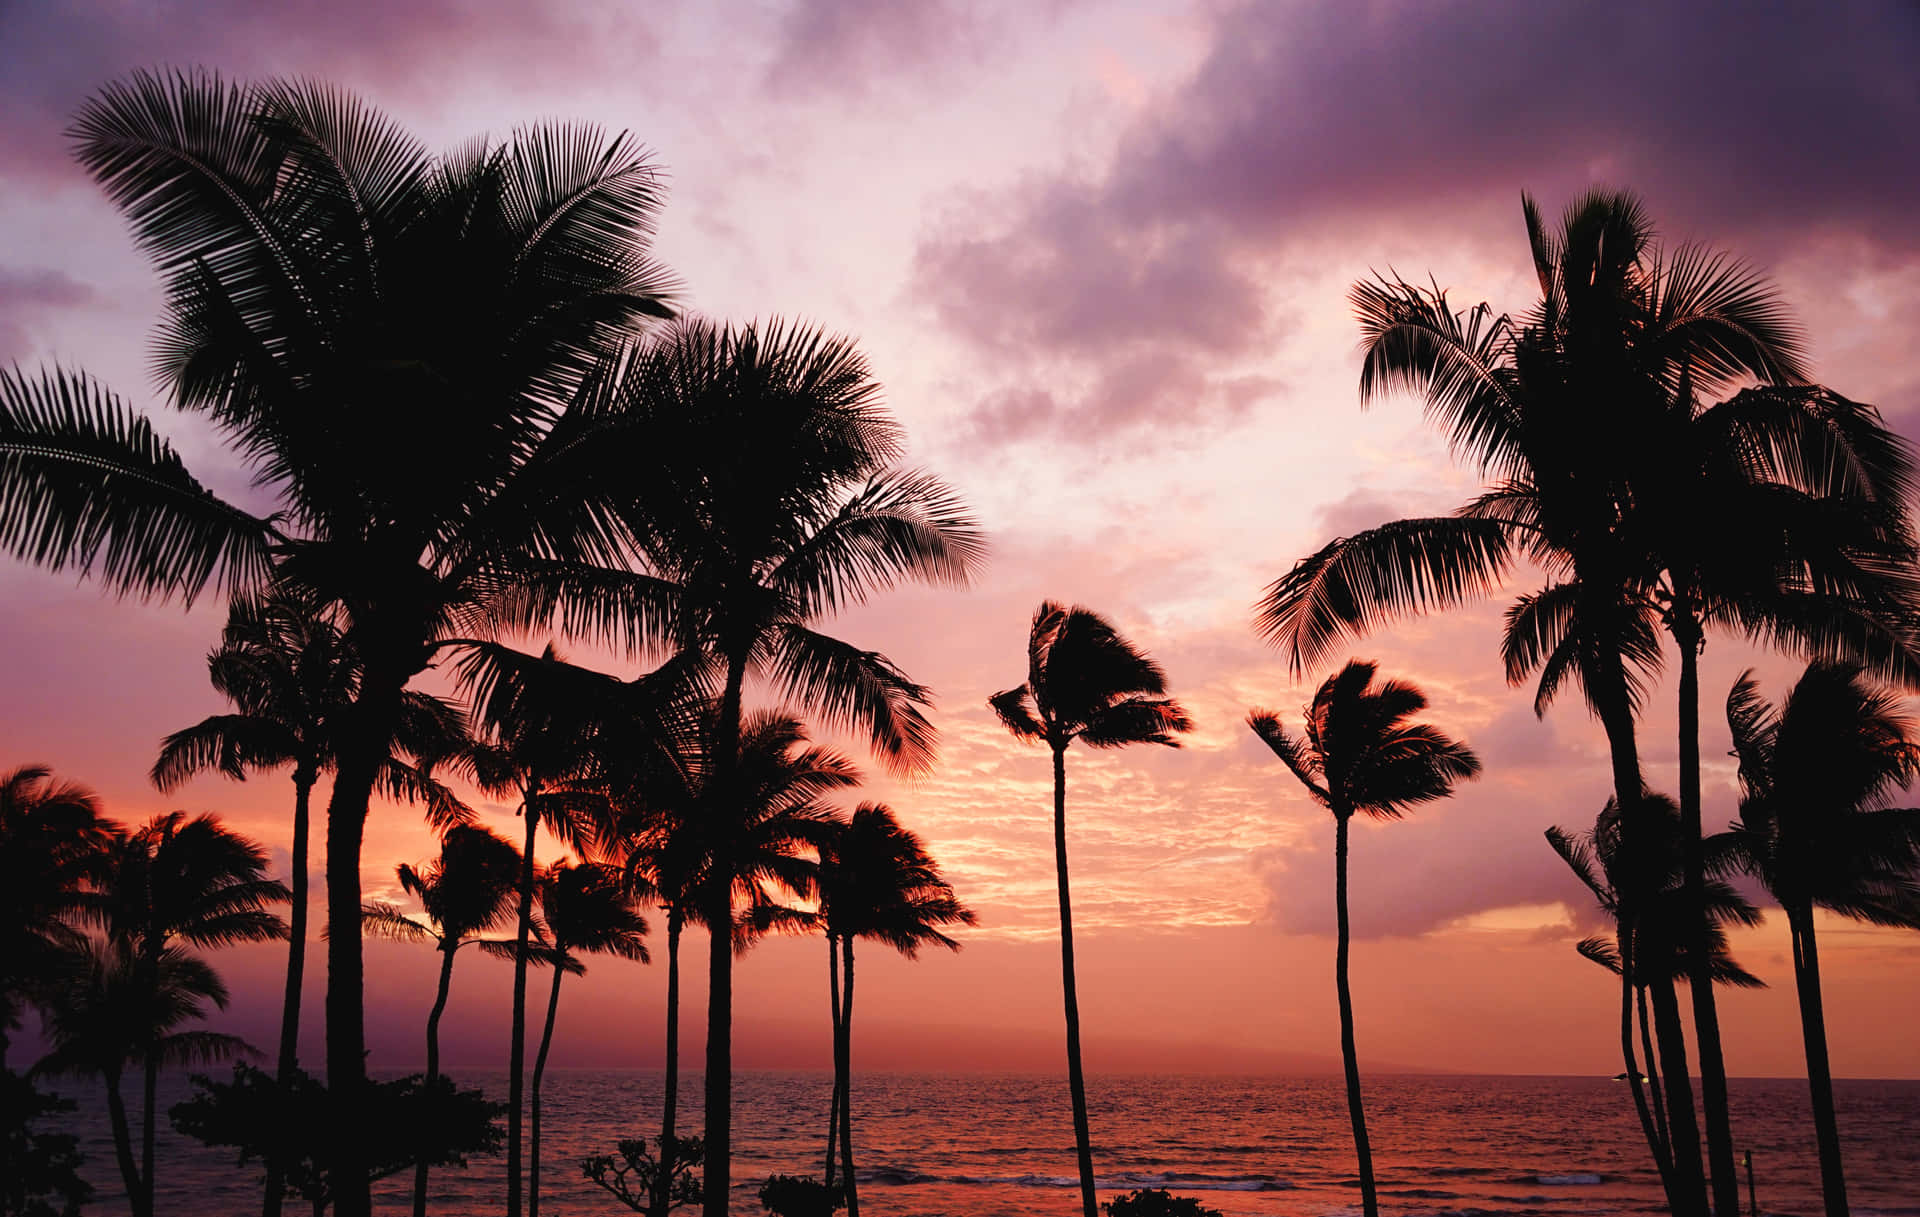 Take in the beauty of a Hawaiian sunset Wallpaper